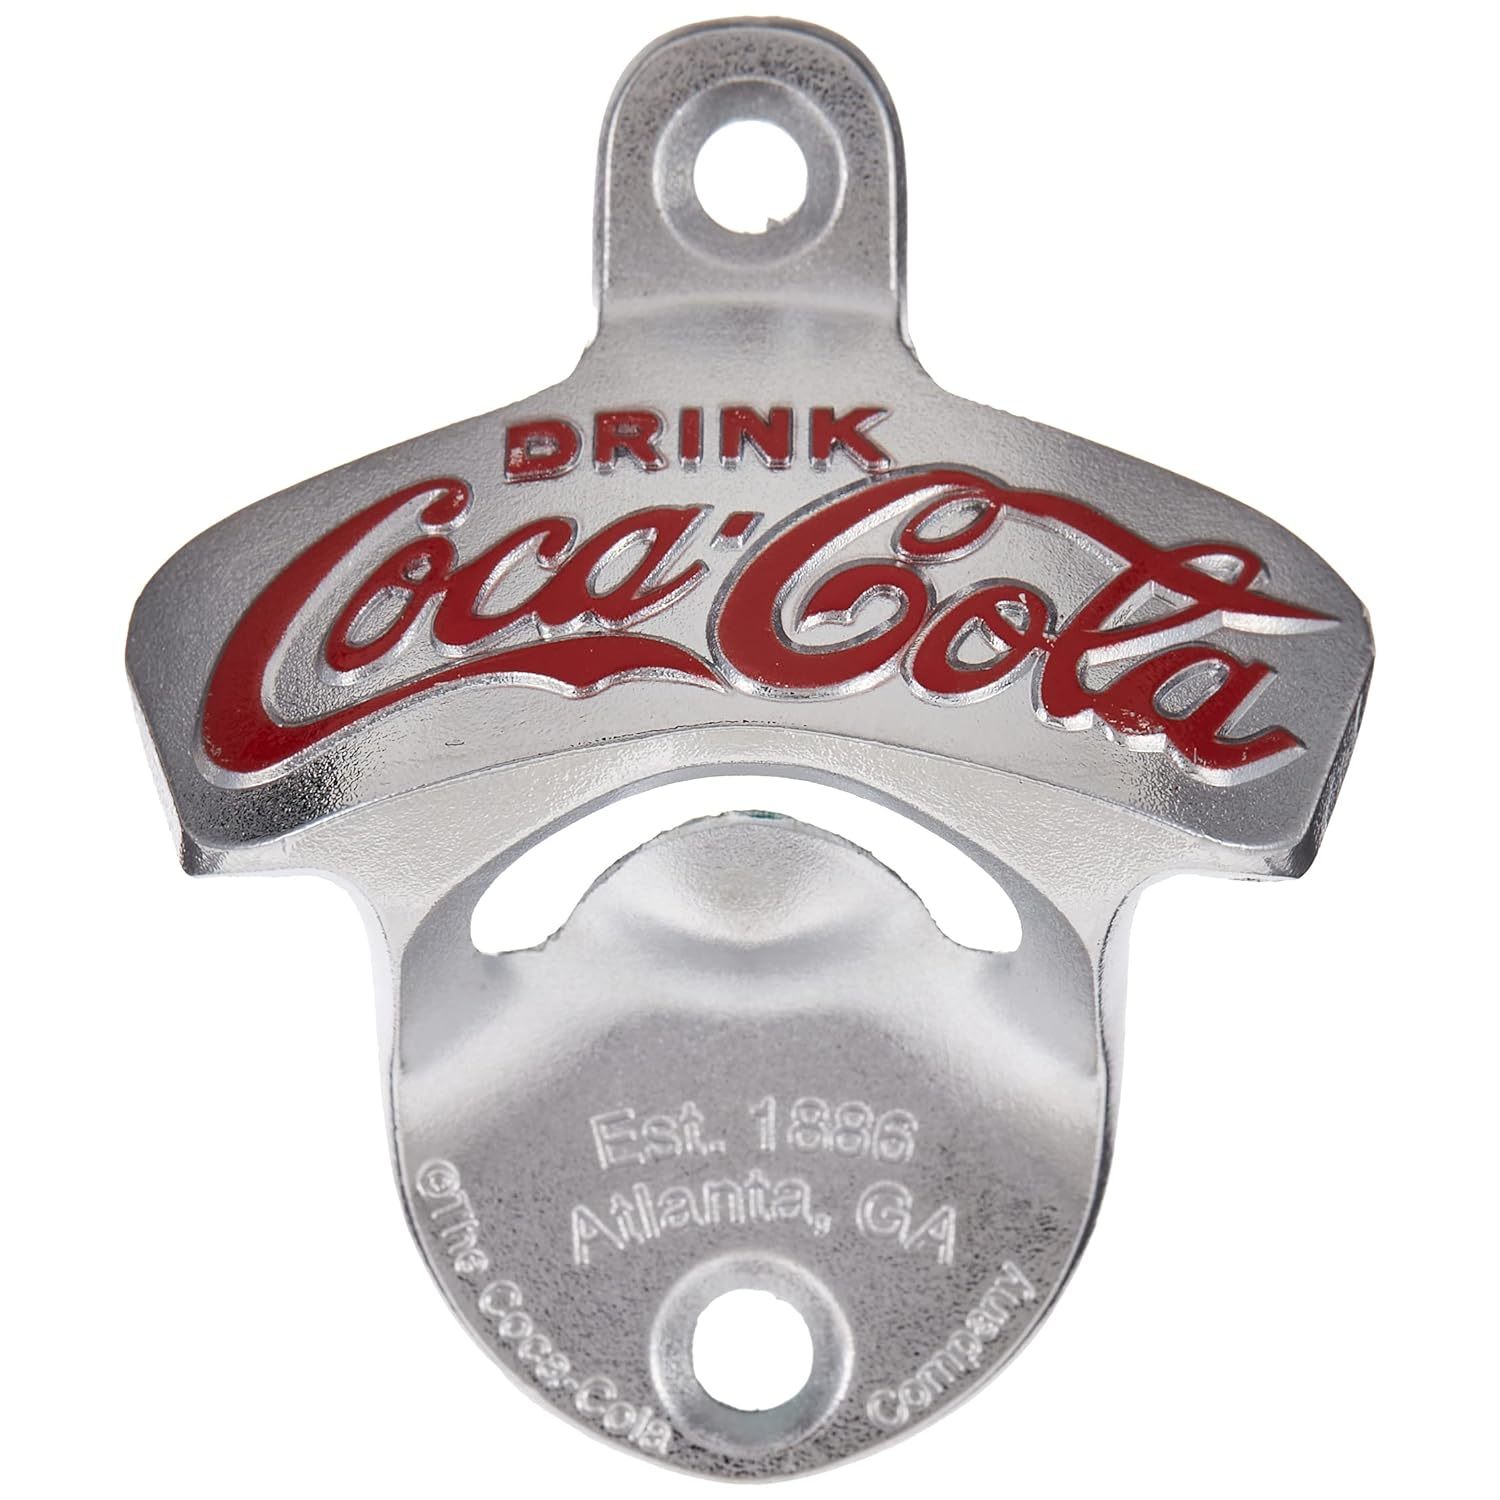 TableCraft Coca-Cola Wall Mount Bottle Opener Small - $19.99